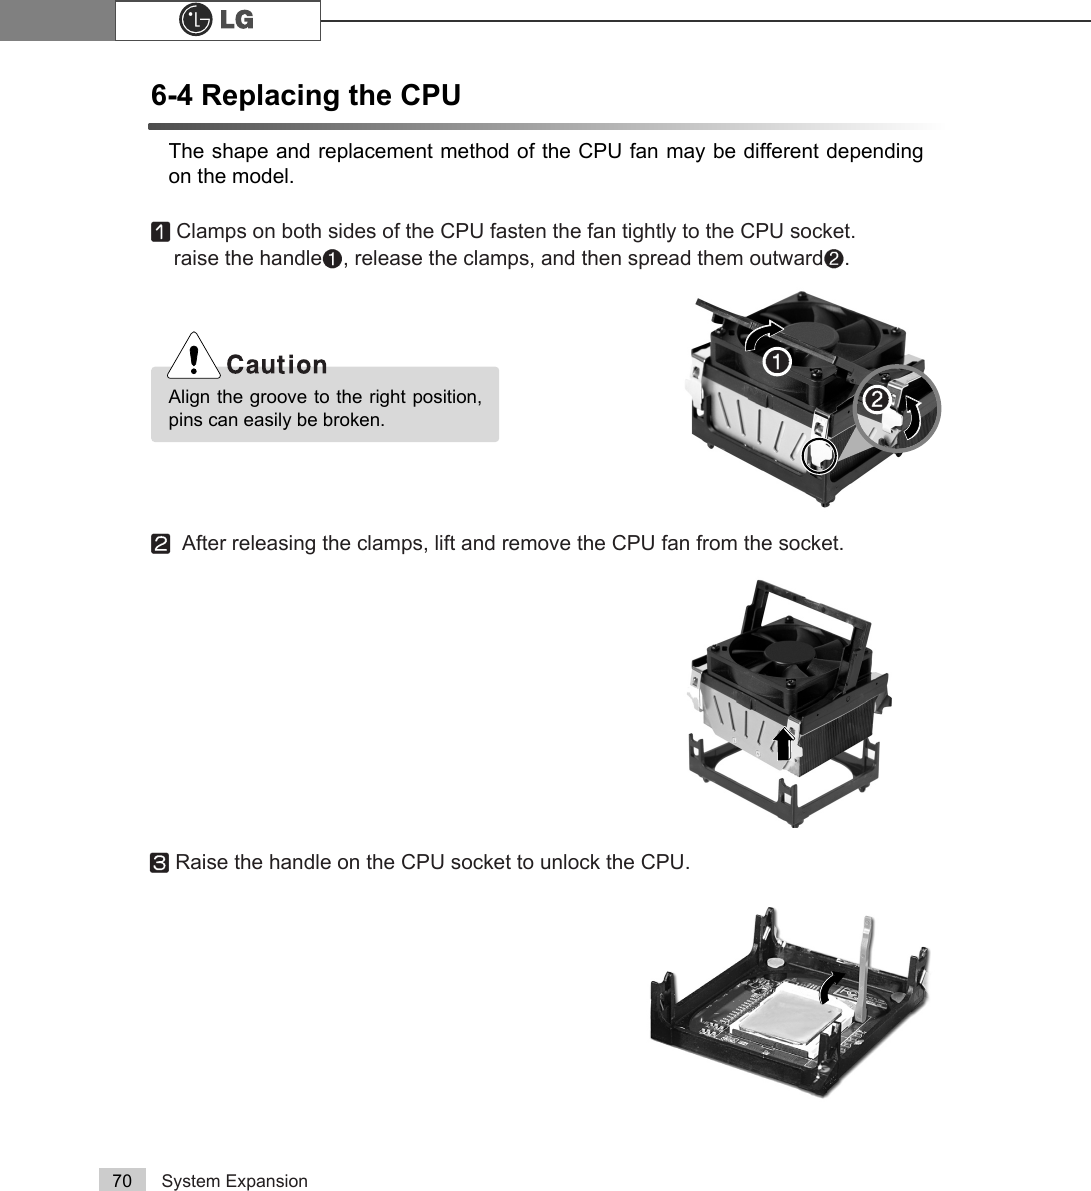 System Expansion706-4 Replacing the CPUThe shape and replacement method of the CPU fan may be different dependingon the model.ⓞClamps on both sides of the CPU fasten the fan tightly to the CPU socket. raise the handle℘, release the clamps, and then spread them outwardℙ.ⓟAfter releasing the clamps, lift and remove the CPU fan from the socket.ⓠRaise the handle on the CPU socket to unlock the CPU.Align the groove to the right position,pins can easily be broken. ℙ℘